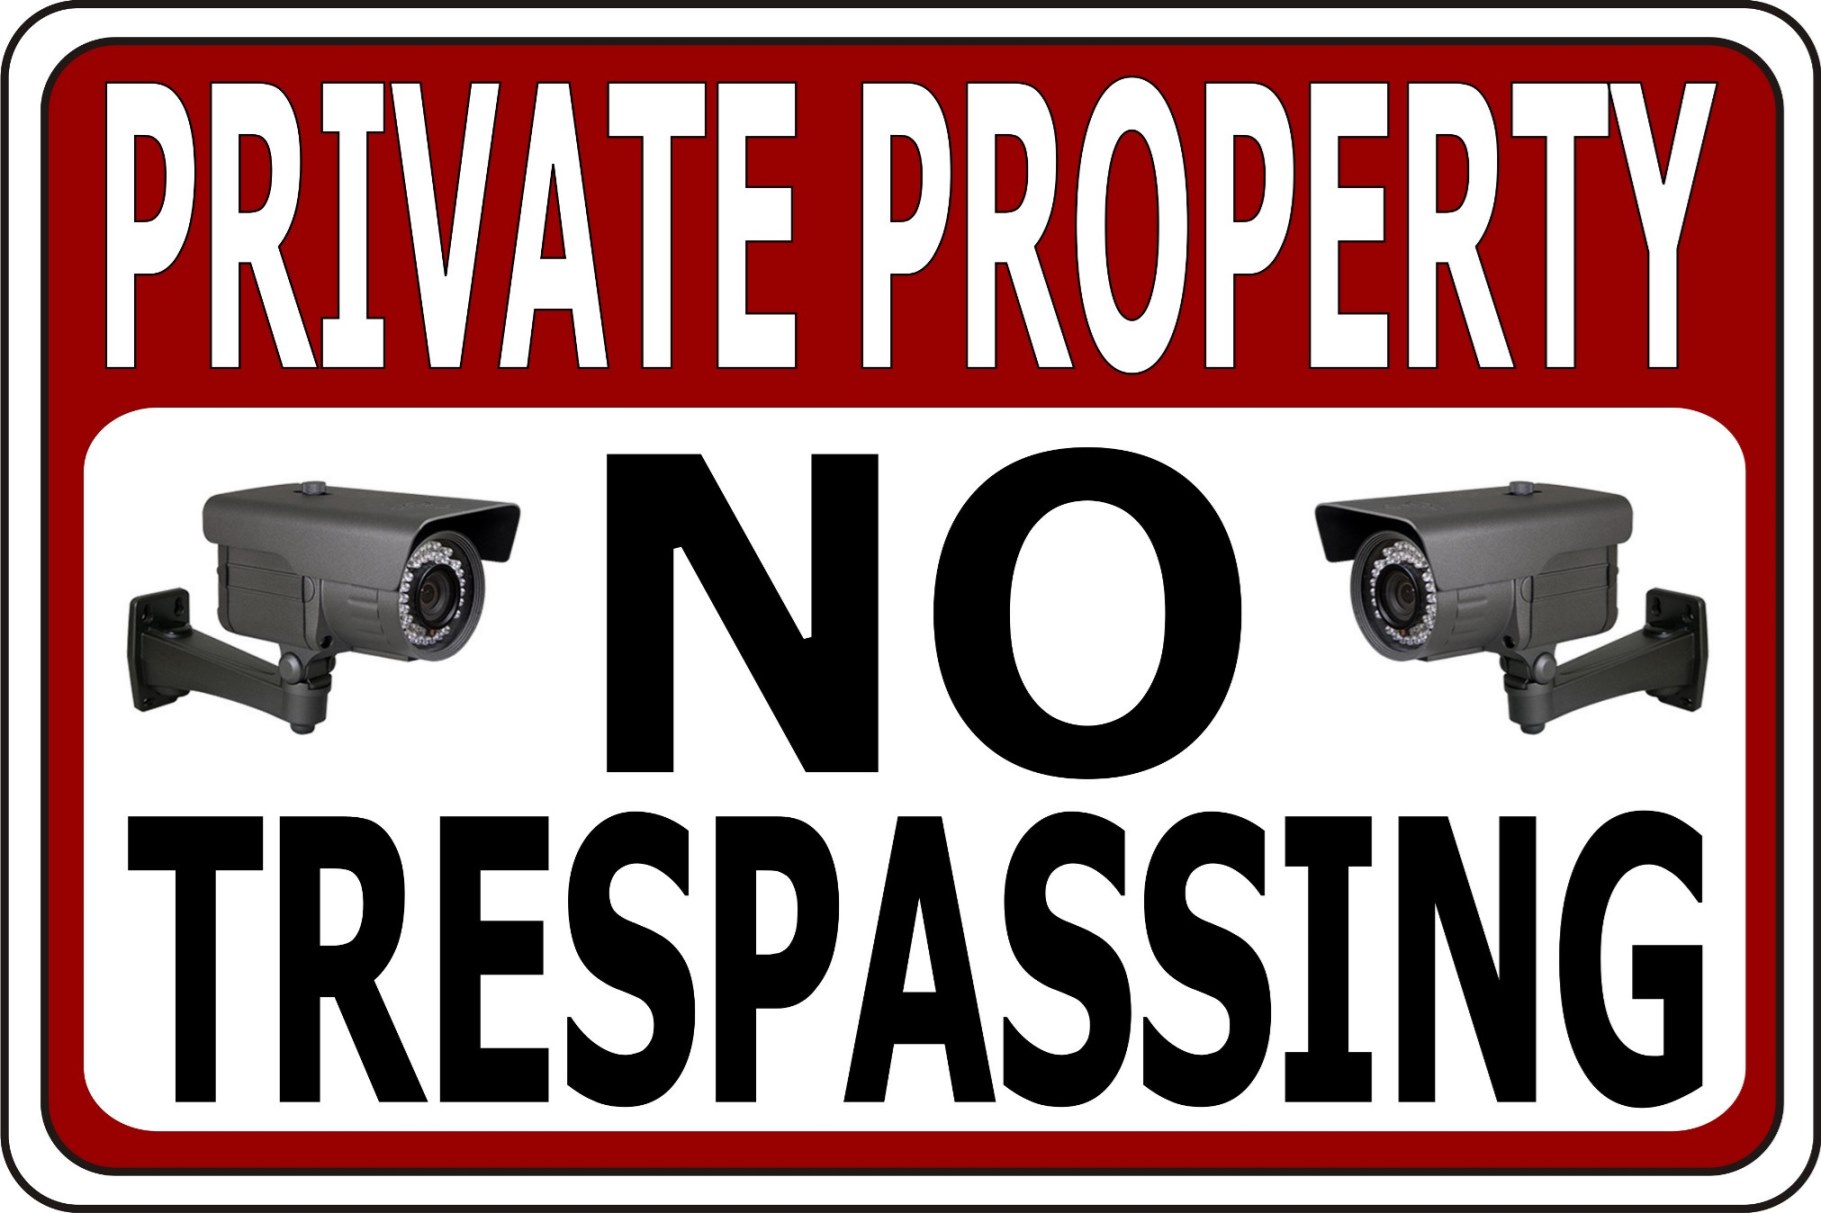 Private Property No Trespassing  With Cameras Photo Parking SIGN